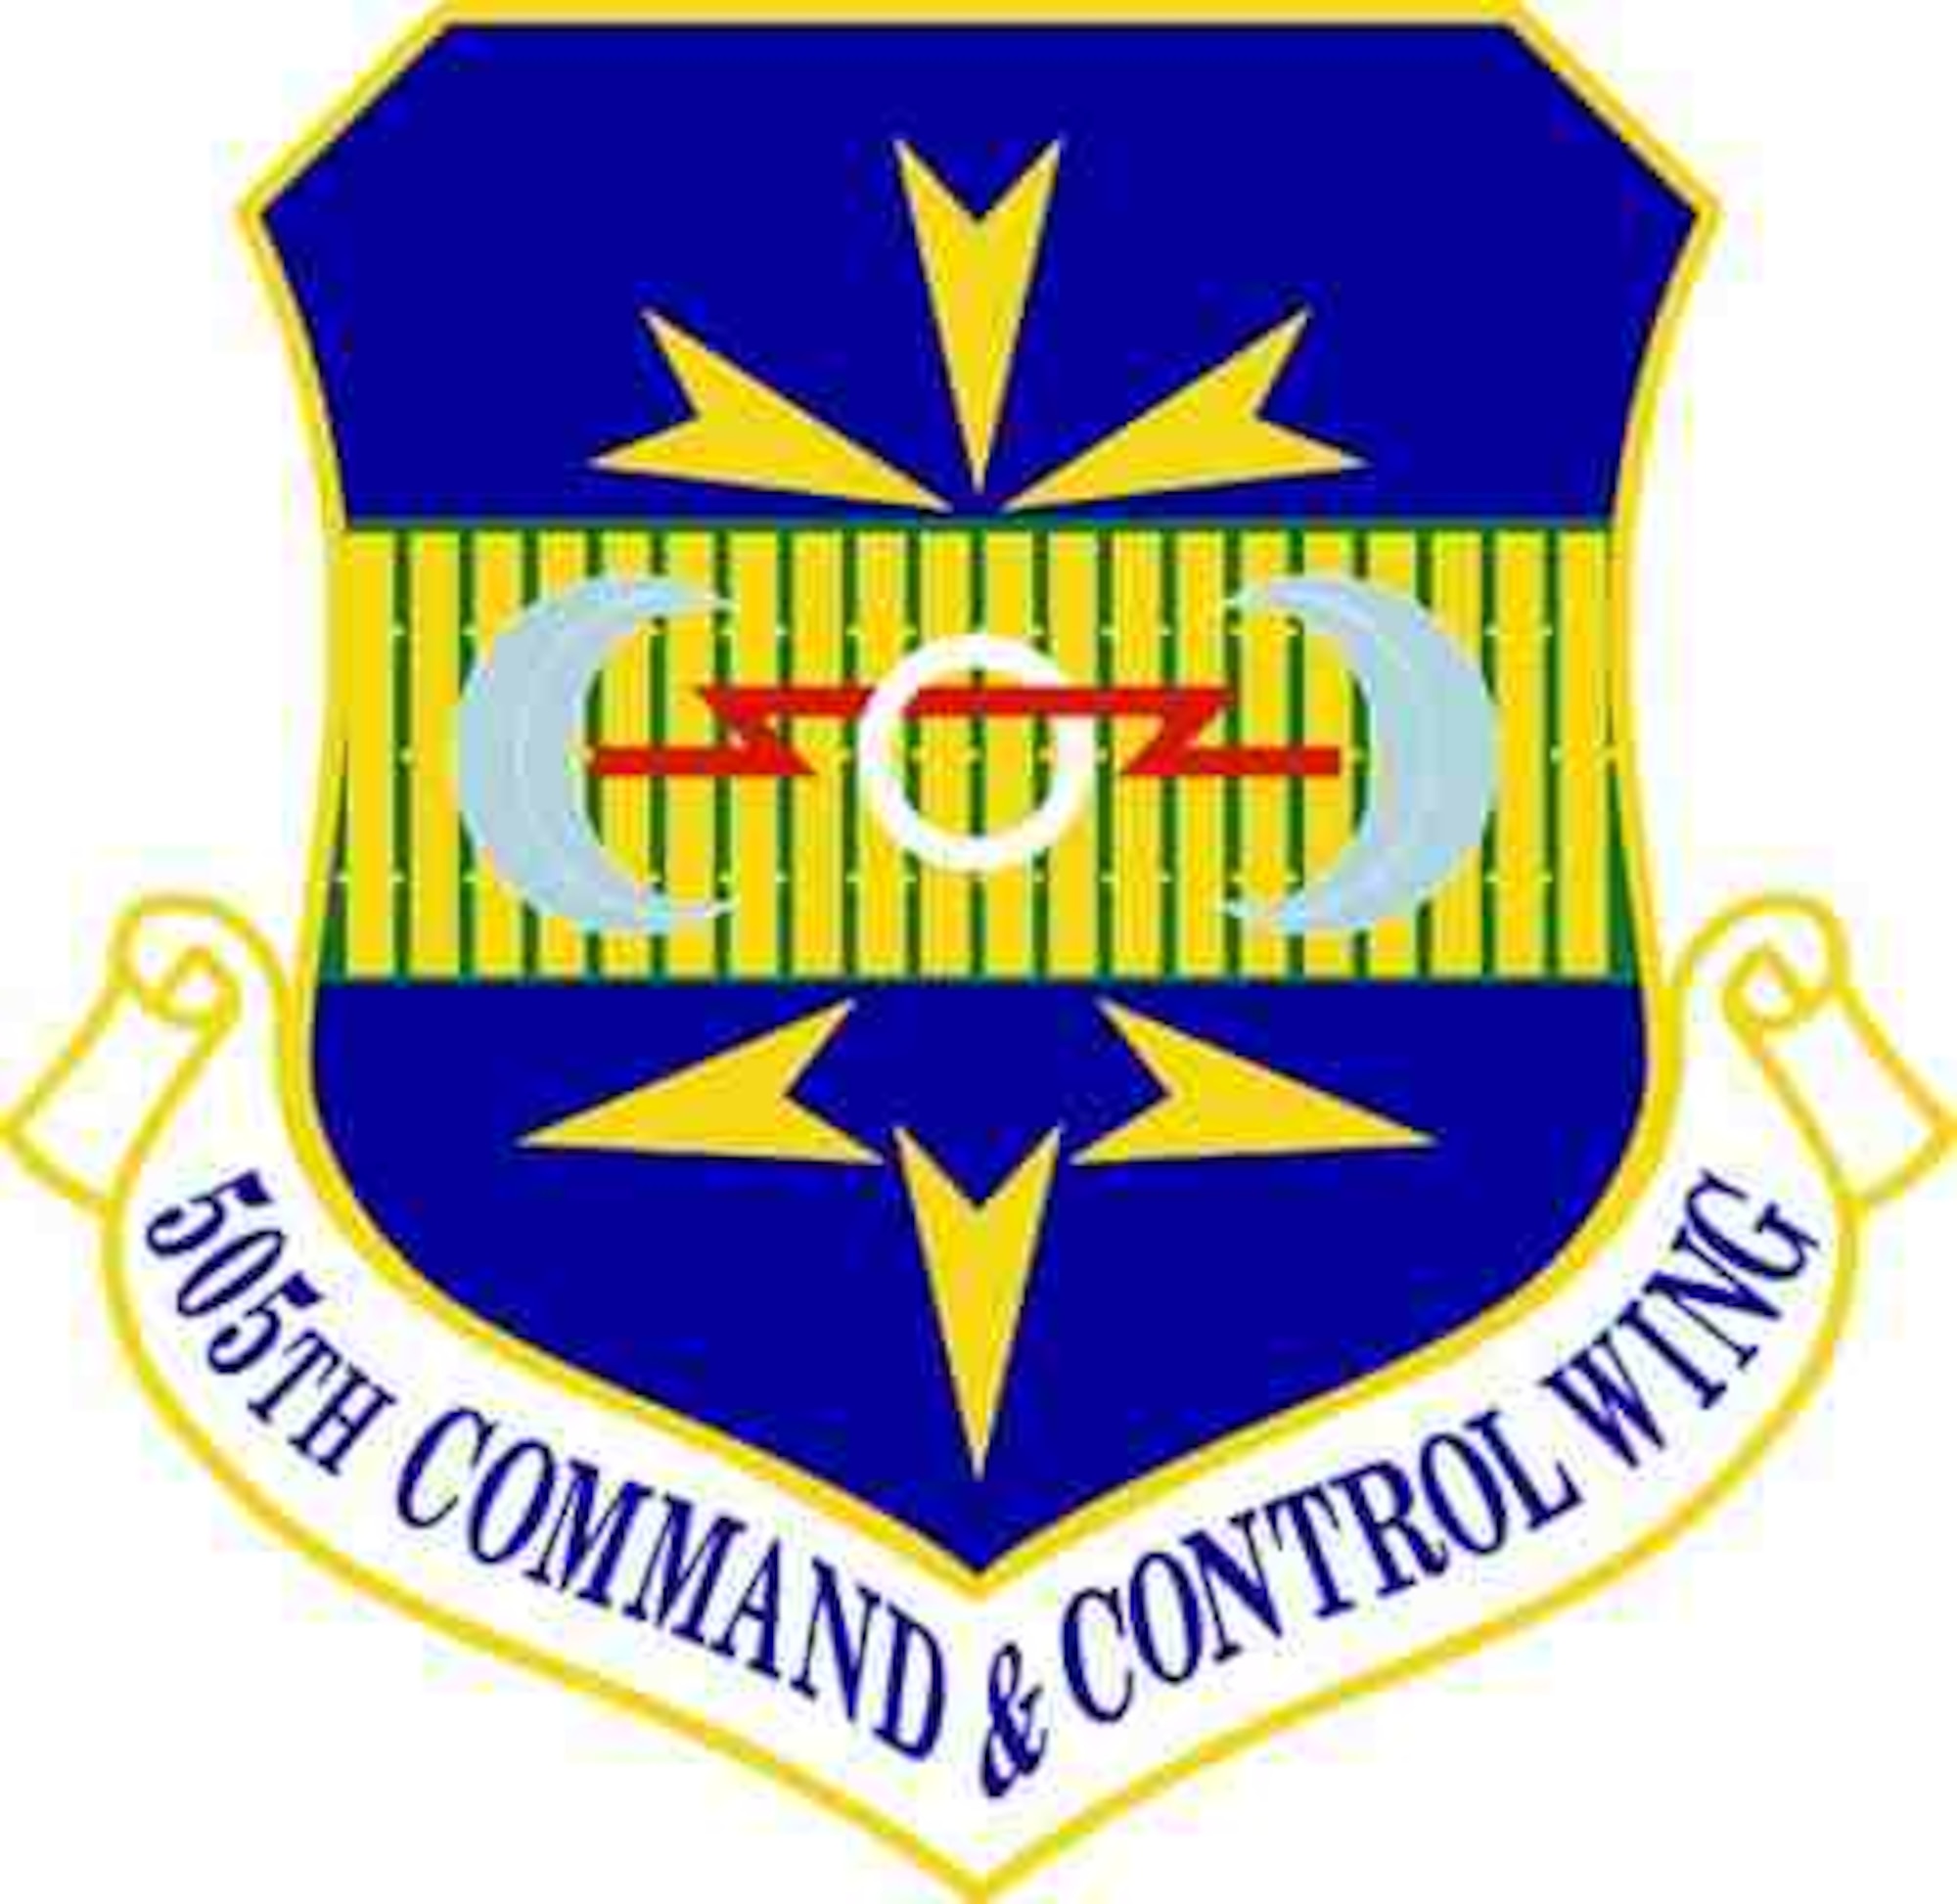 505th Command and Control Wing: The blue background represents the sky, the primary theater of Air Force operations.  The bamboo curtain signifies the units service in Vietnam.  The control and direction of strike aircraft against the enemy by Forward Air Controllers is symbolized by the flight symbols in chief.  The flight symbols in base allude to the control of aircraft for effective air defense.  The double bevile refers to lightning and represents the unit’s complete ground/air communications support, search and direction capability.  The crescents symbolize the moon going through its phases and represent the Wing’s continuing performance of its mission month in and month out.  The emblem bears the National colors and the Air Force colors of gold and ultramarine blue. 